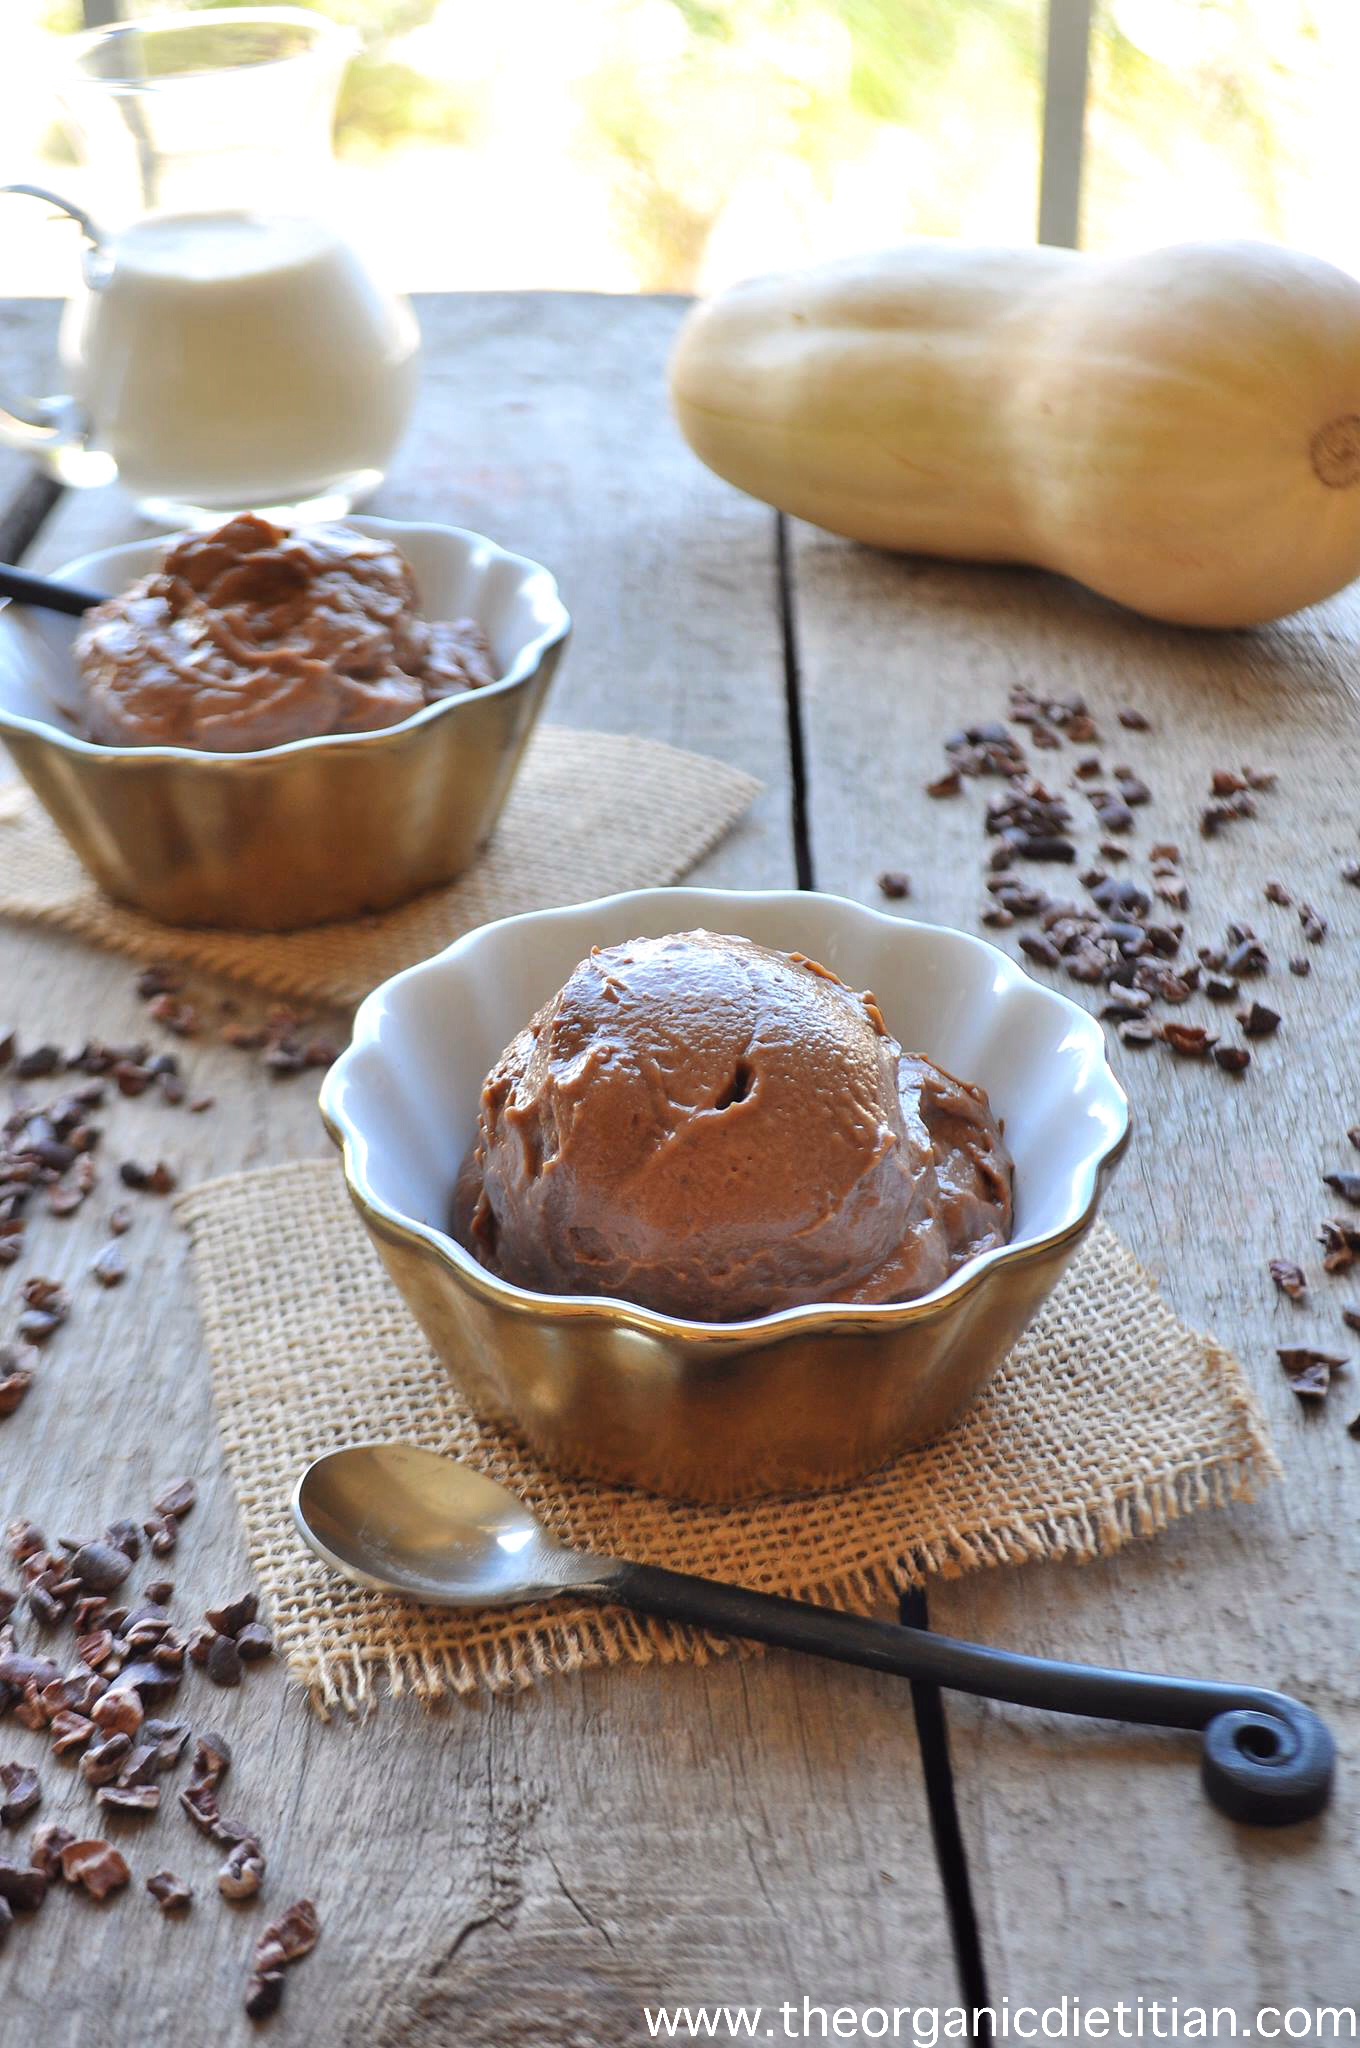 Chocolate Banana Pudding: With a Hidden Ingredient - The Organic Dietitian